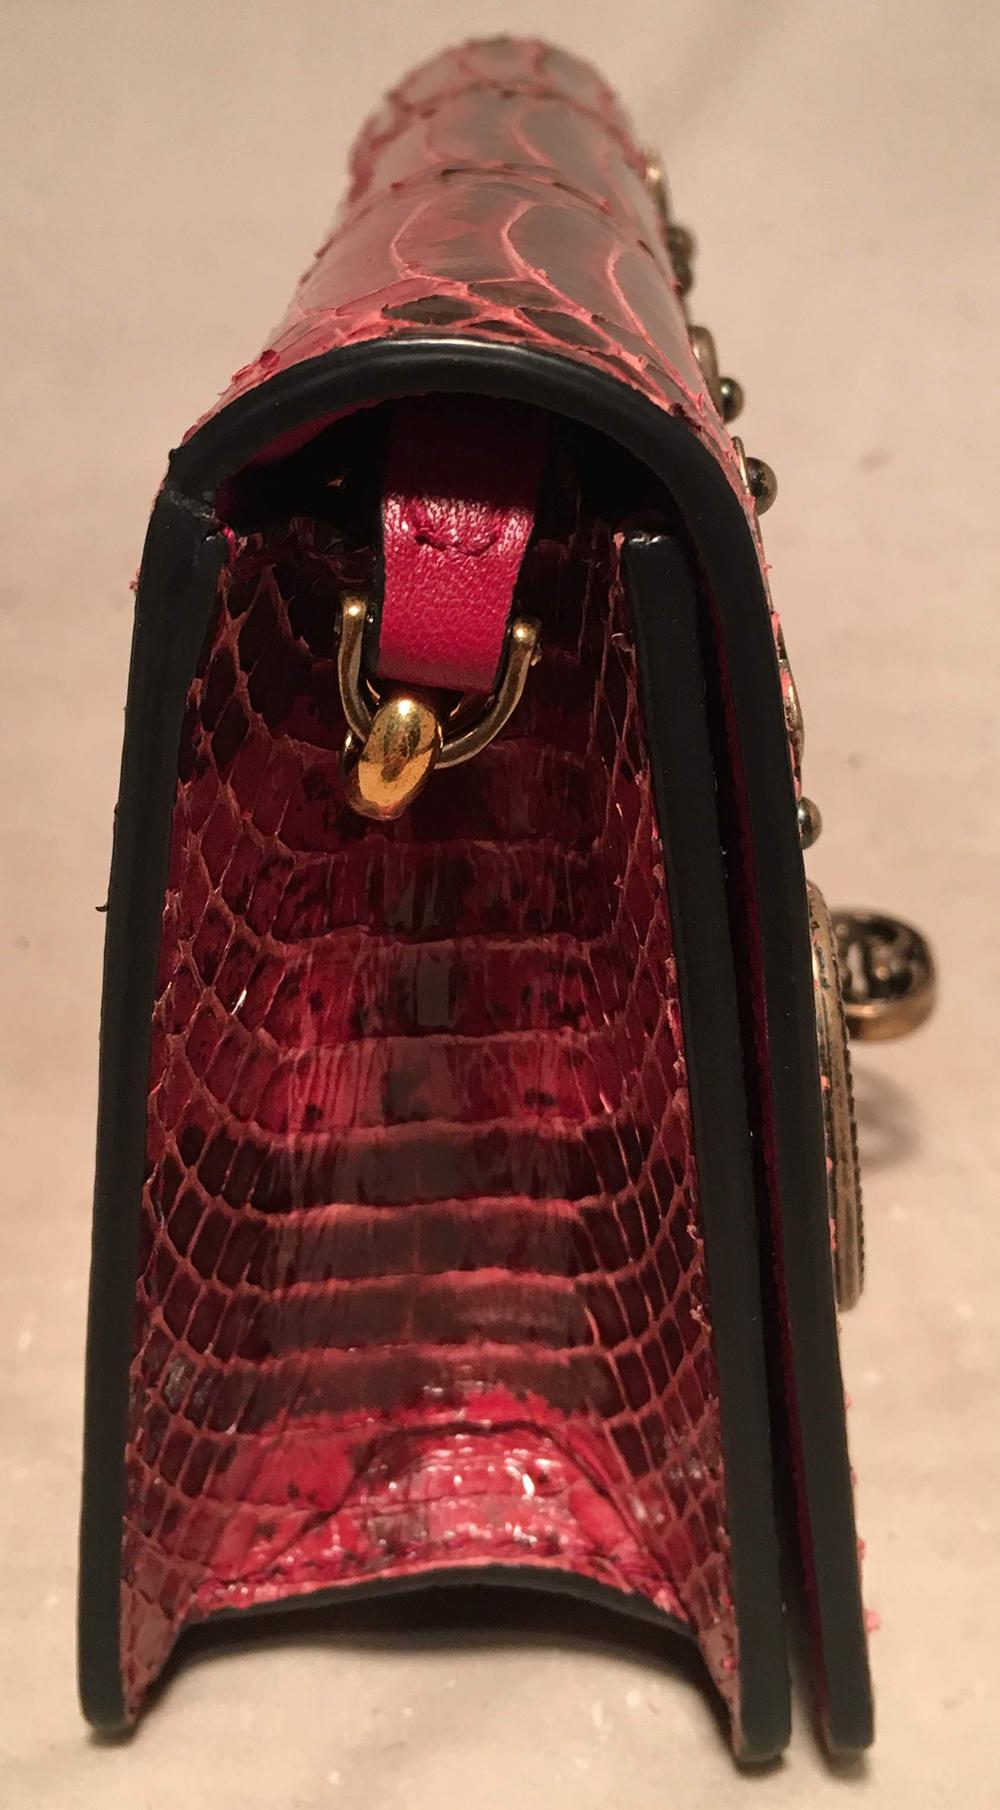 Dolce and Gabbana Maroon Snakeskin Keyhole Clutch Bag in like new condition. Maroon snakeskin exterior trimmed with antiqued bronze hardware and unique keyhole embellishments upon front flap. Black suede interior. Bronze chain handle converts from